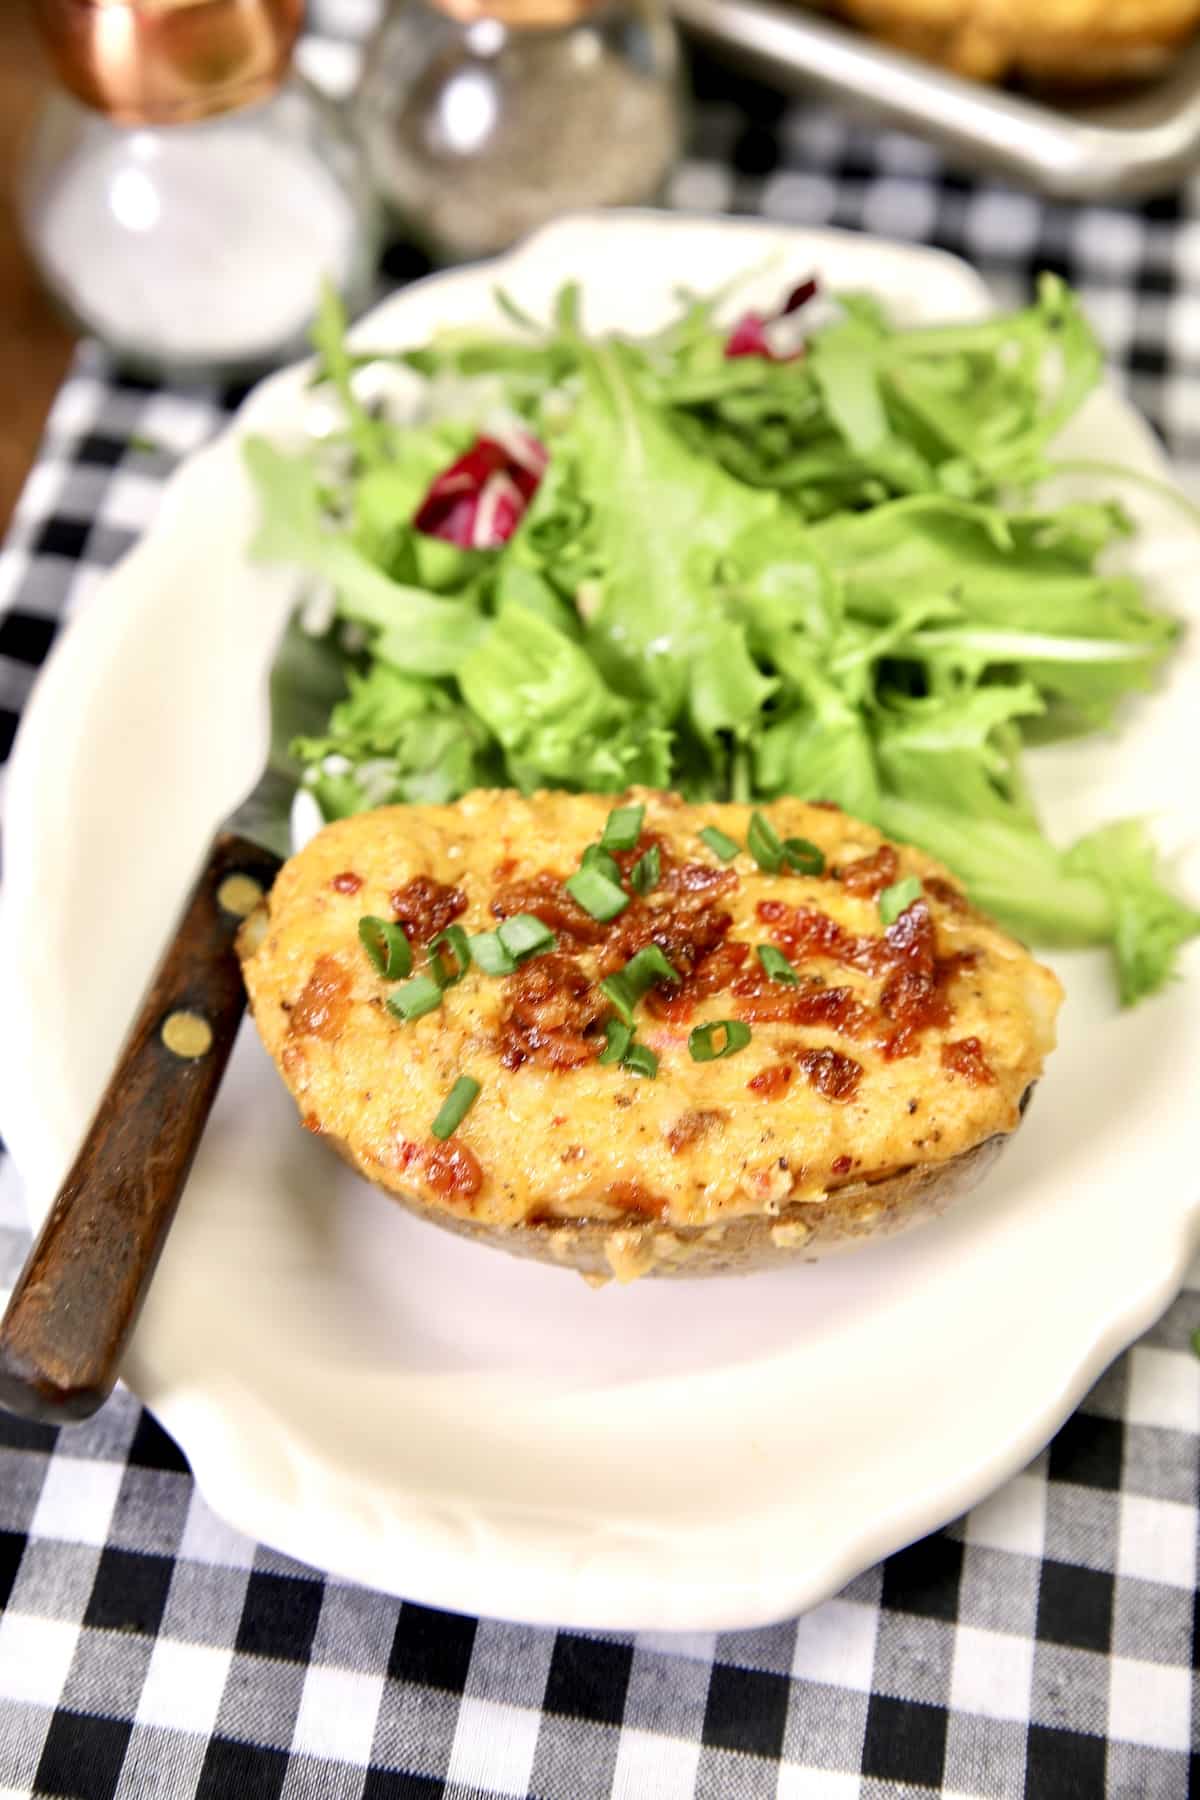 Twice baked potatoes with salad.